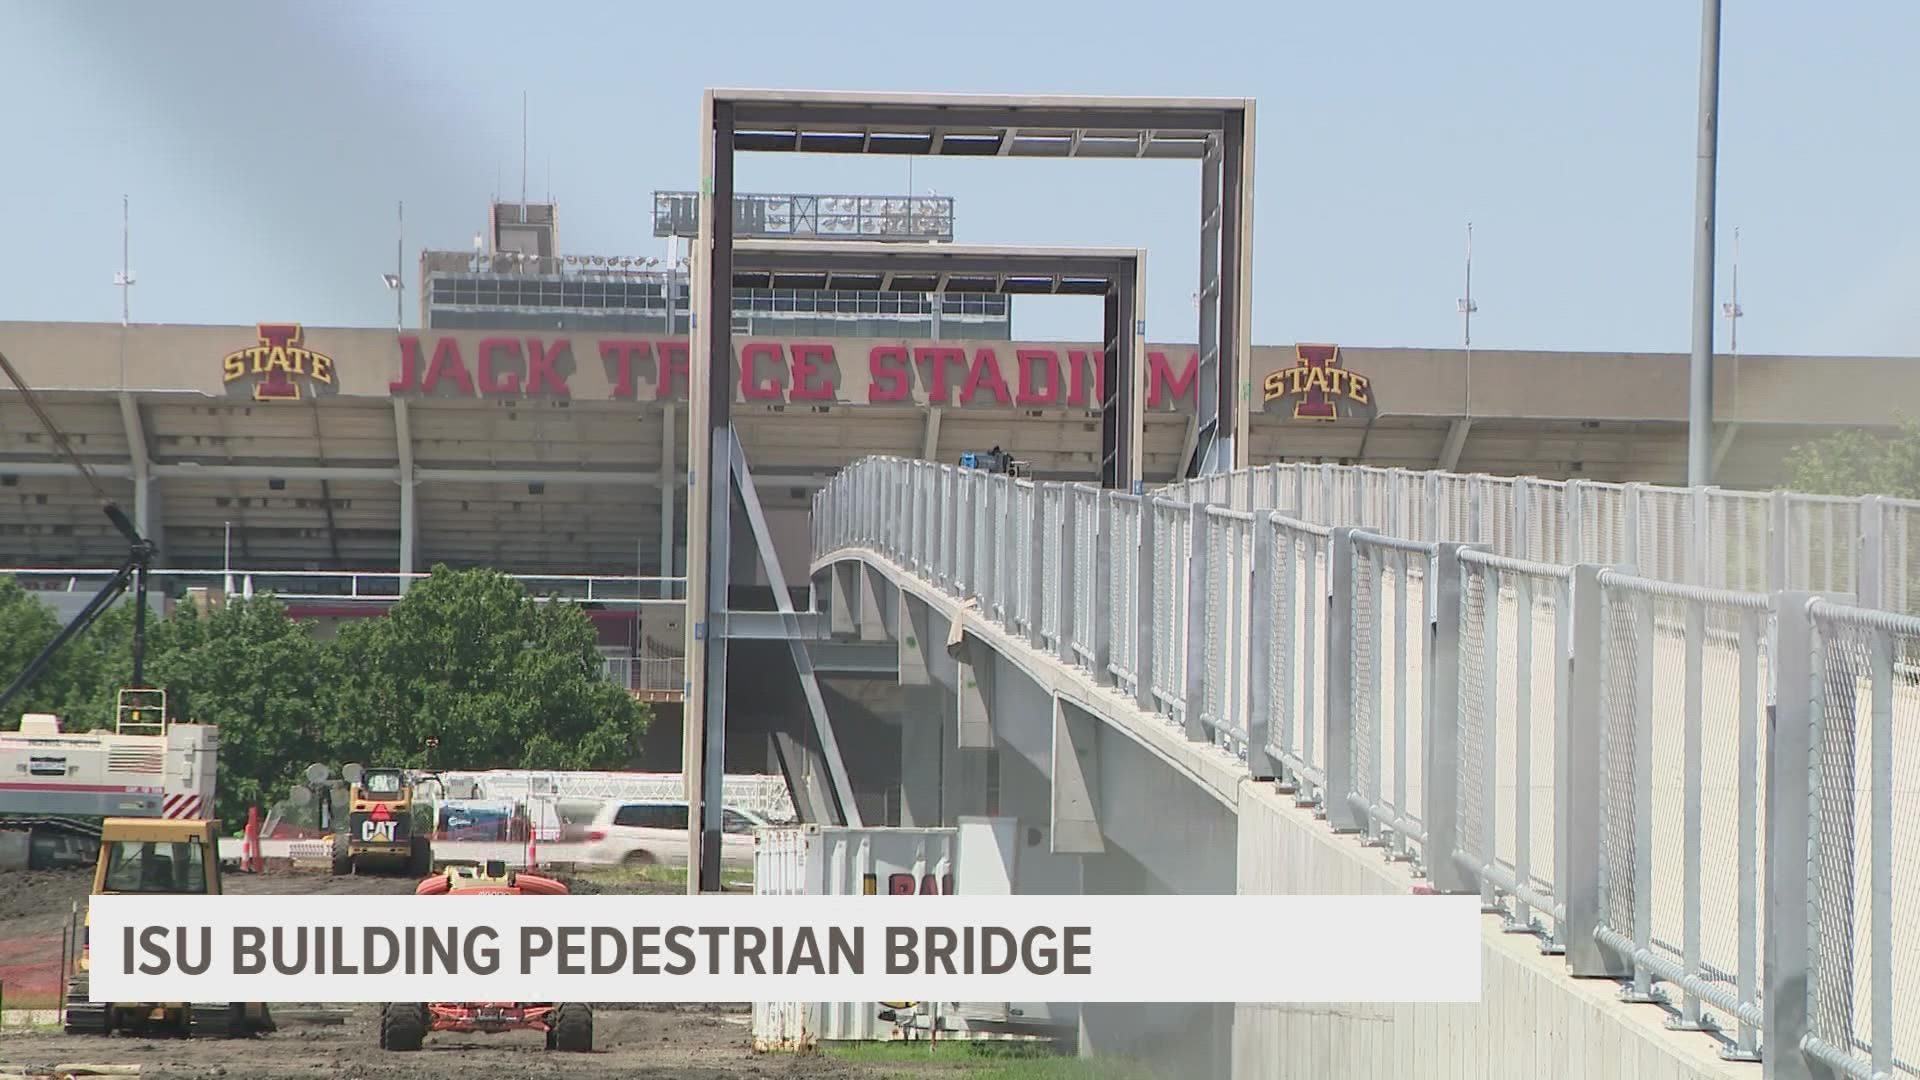 The bridge is designed to make getting to Jack Trice Stadium easier and safer for pedestrians. Iowa State says the bridge will be open by September.